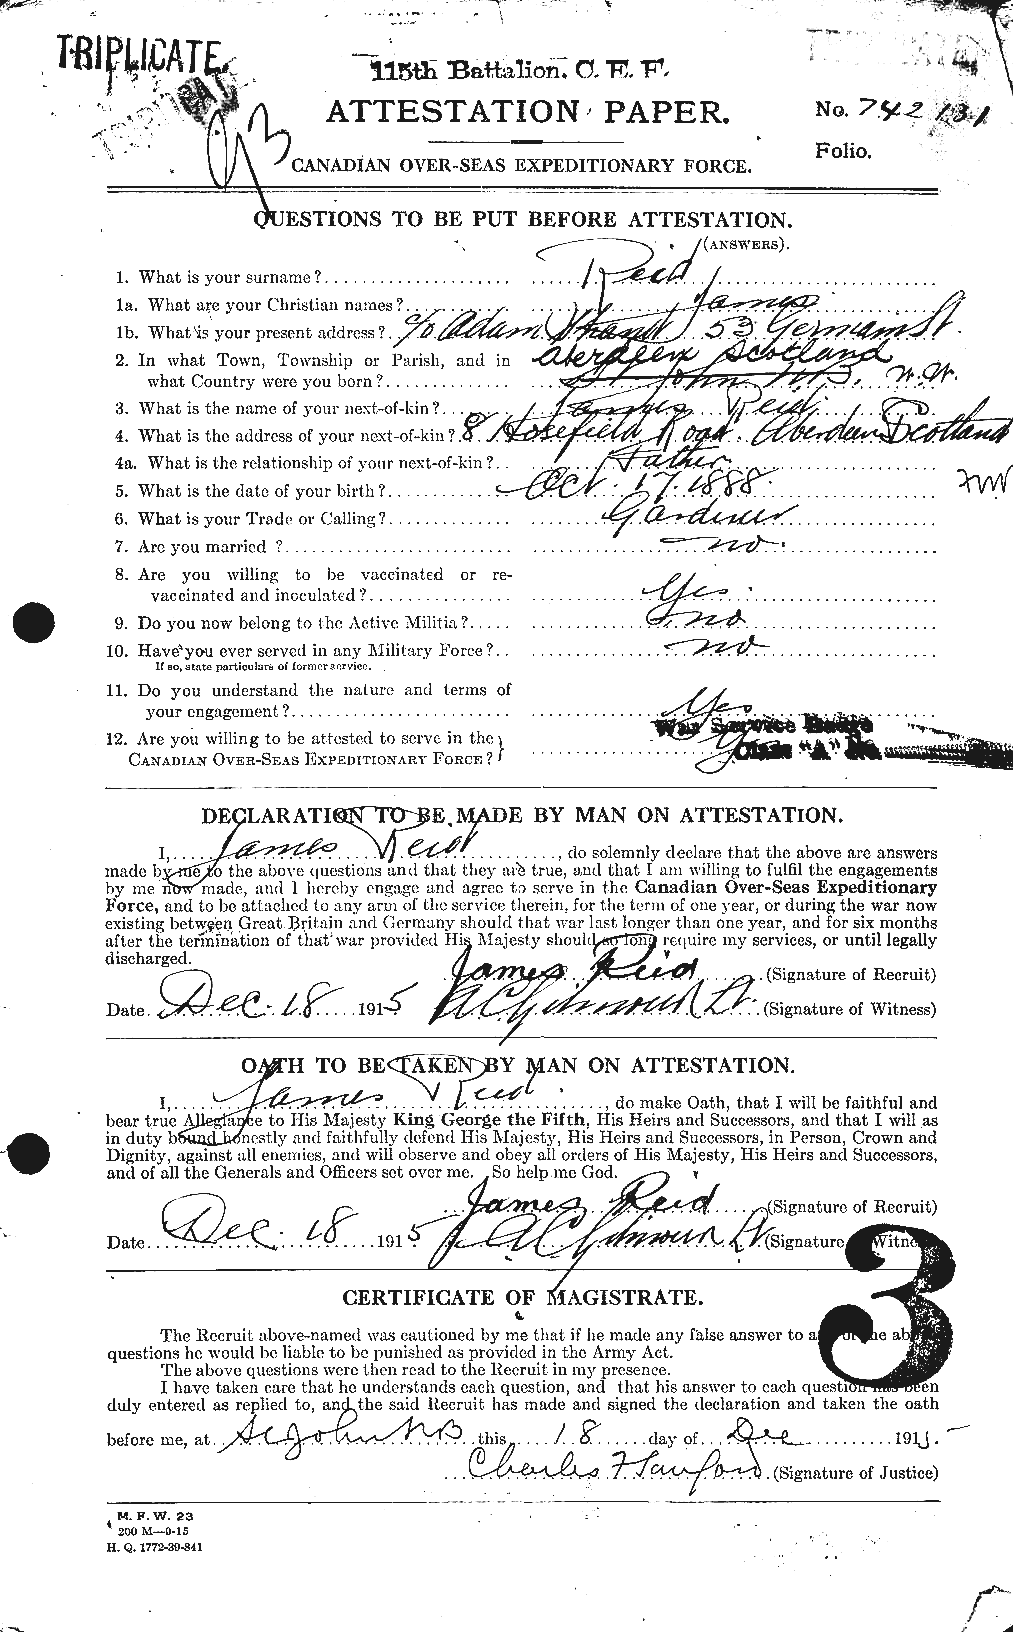 Personnel Records of the First World War - CEF 598659a